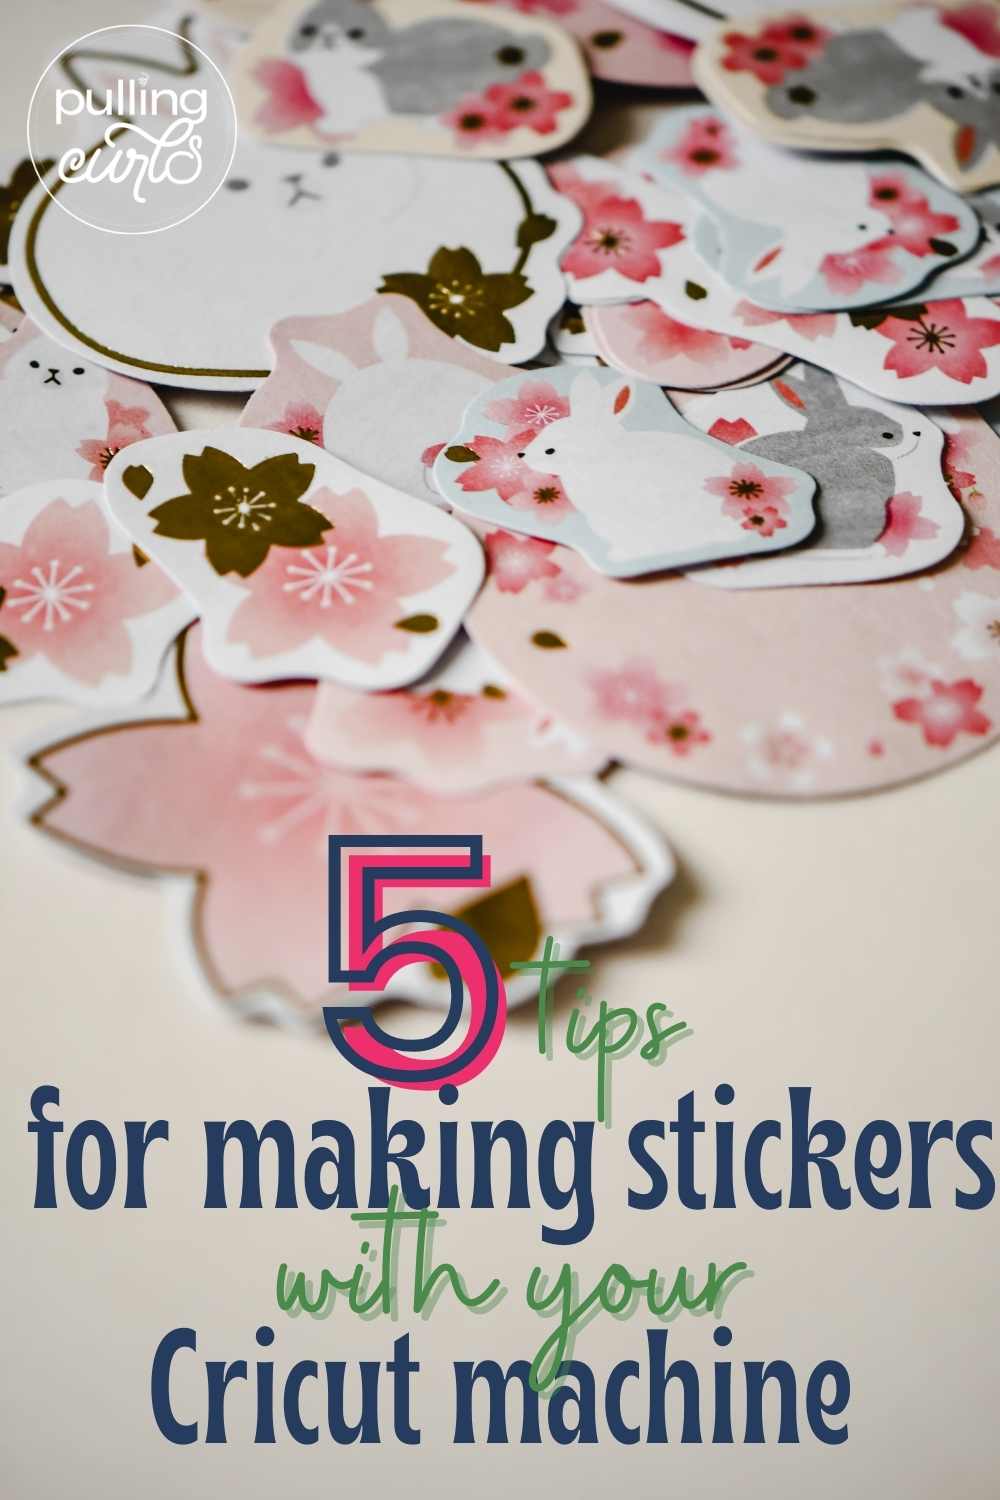 Making stickers with the Cricut Maker is harder than it sounds. Here are 5 tips to help you! via @pullingcurls